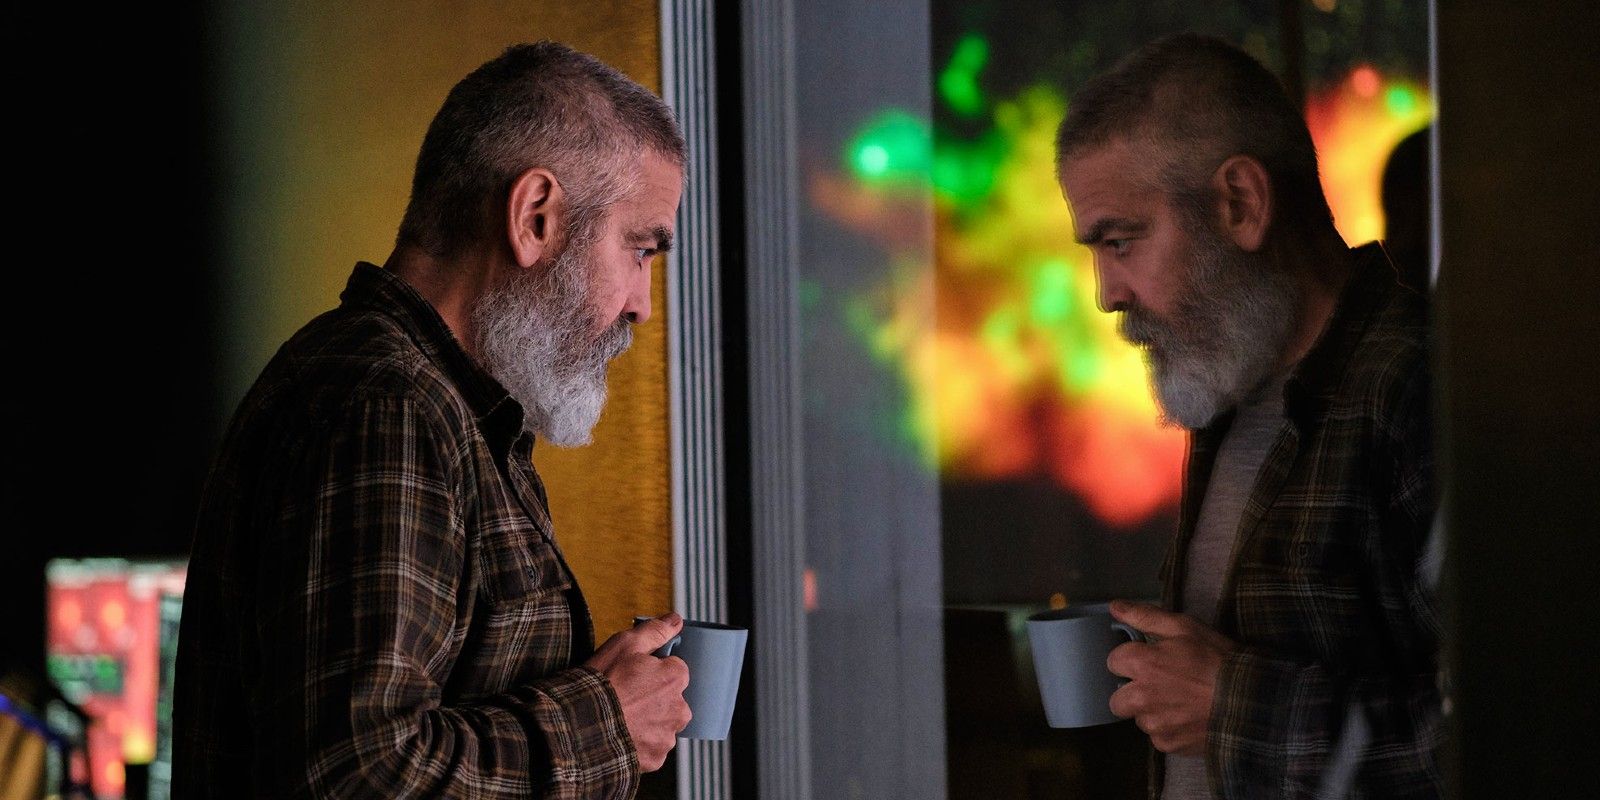 George Clooney stares out the window in Midnight Sky